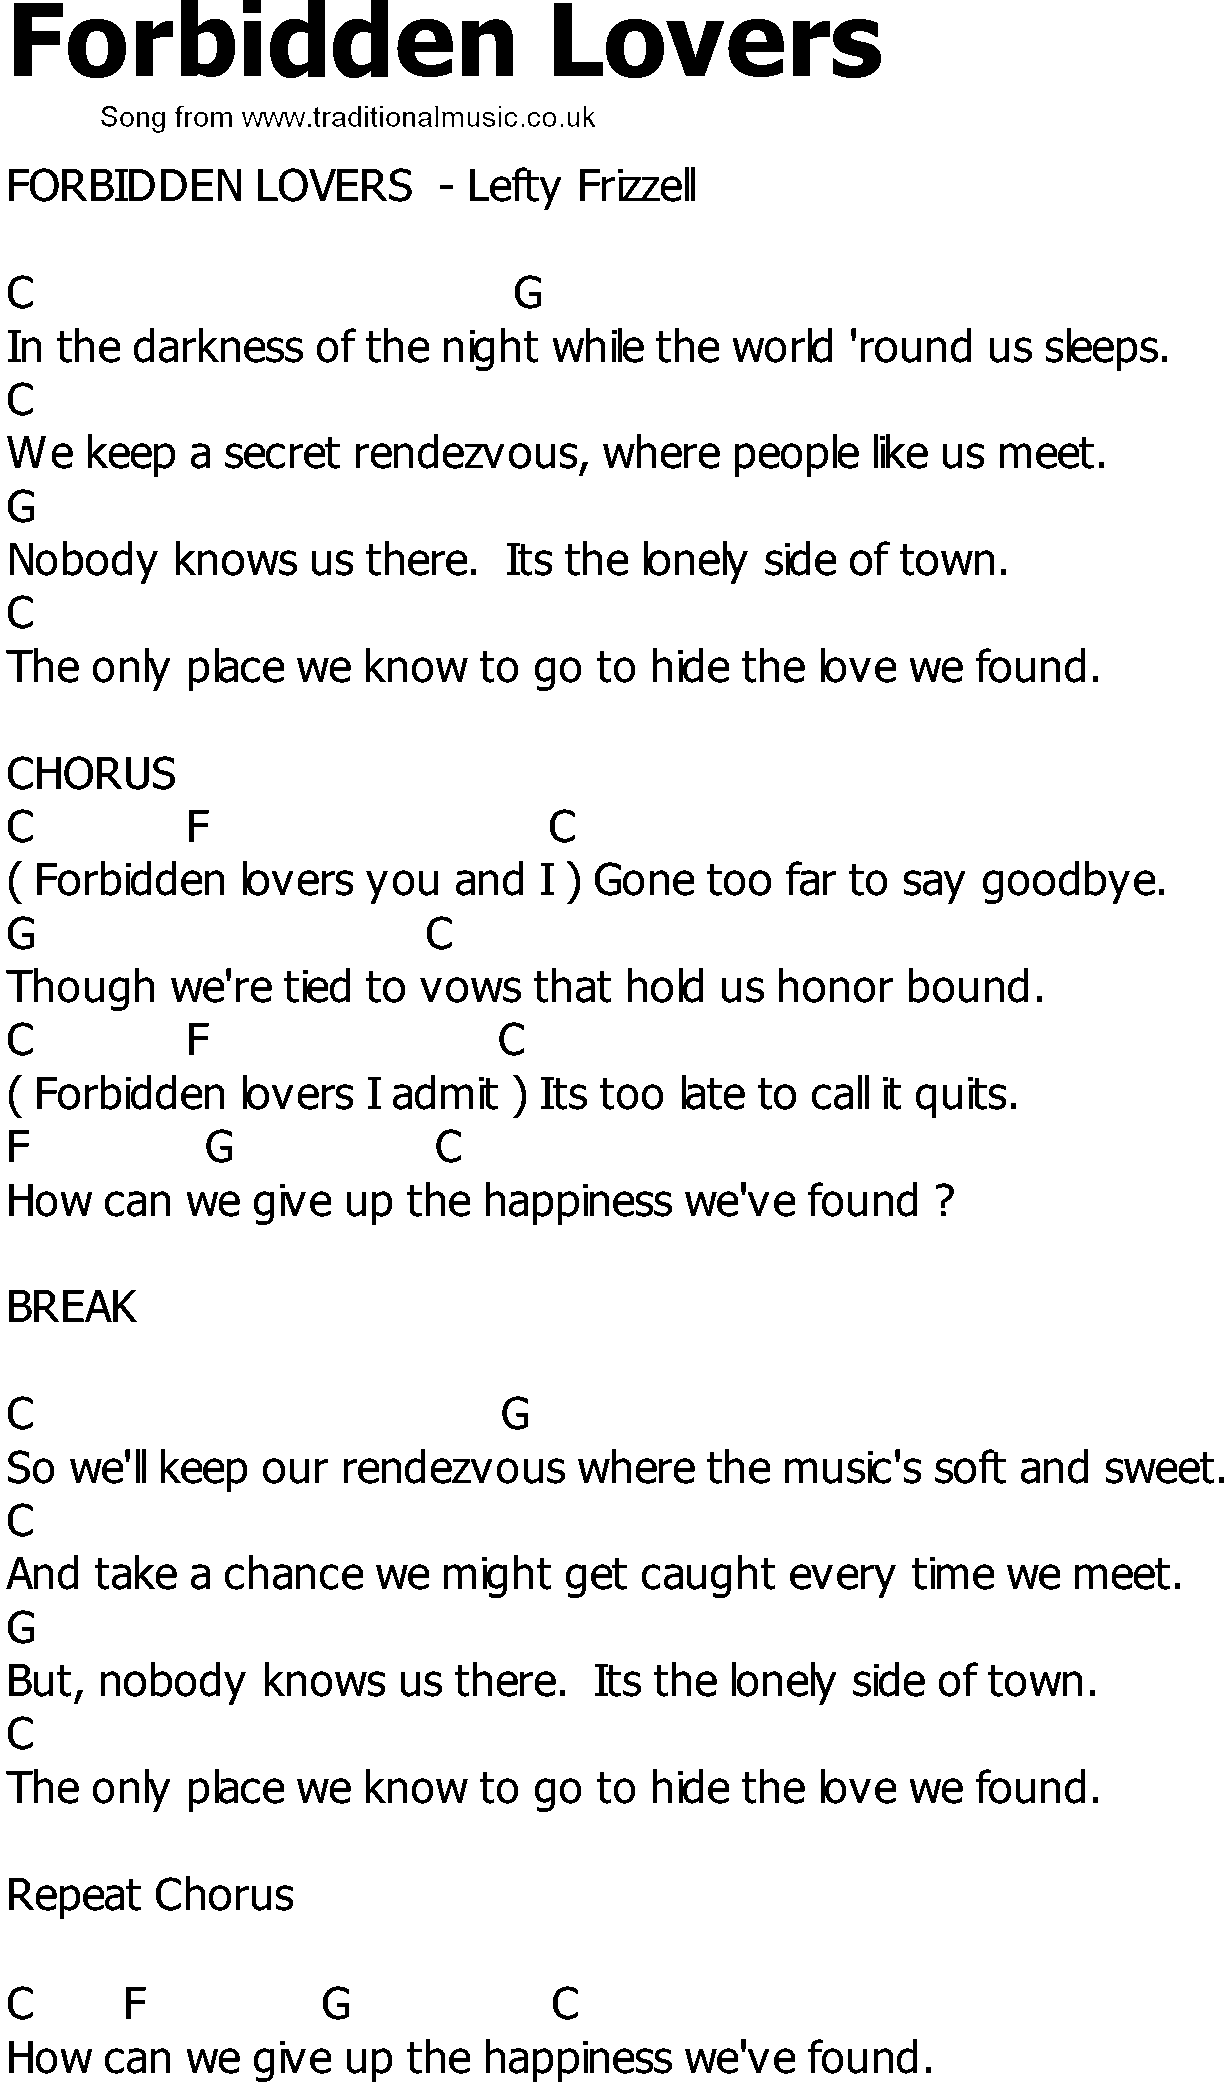 Old Country song lyrics with chords - Forbidden Lovers